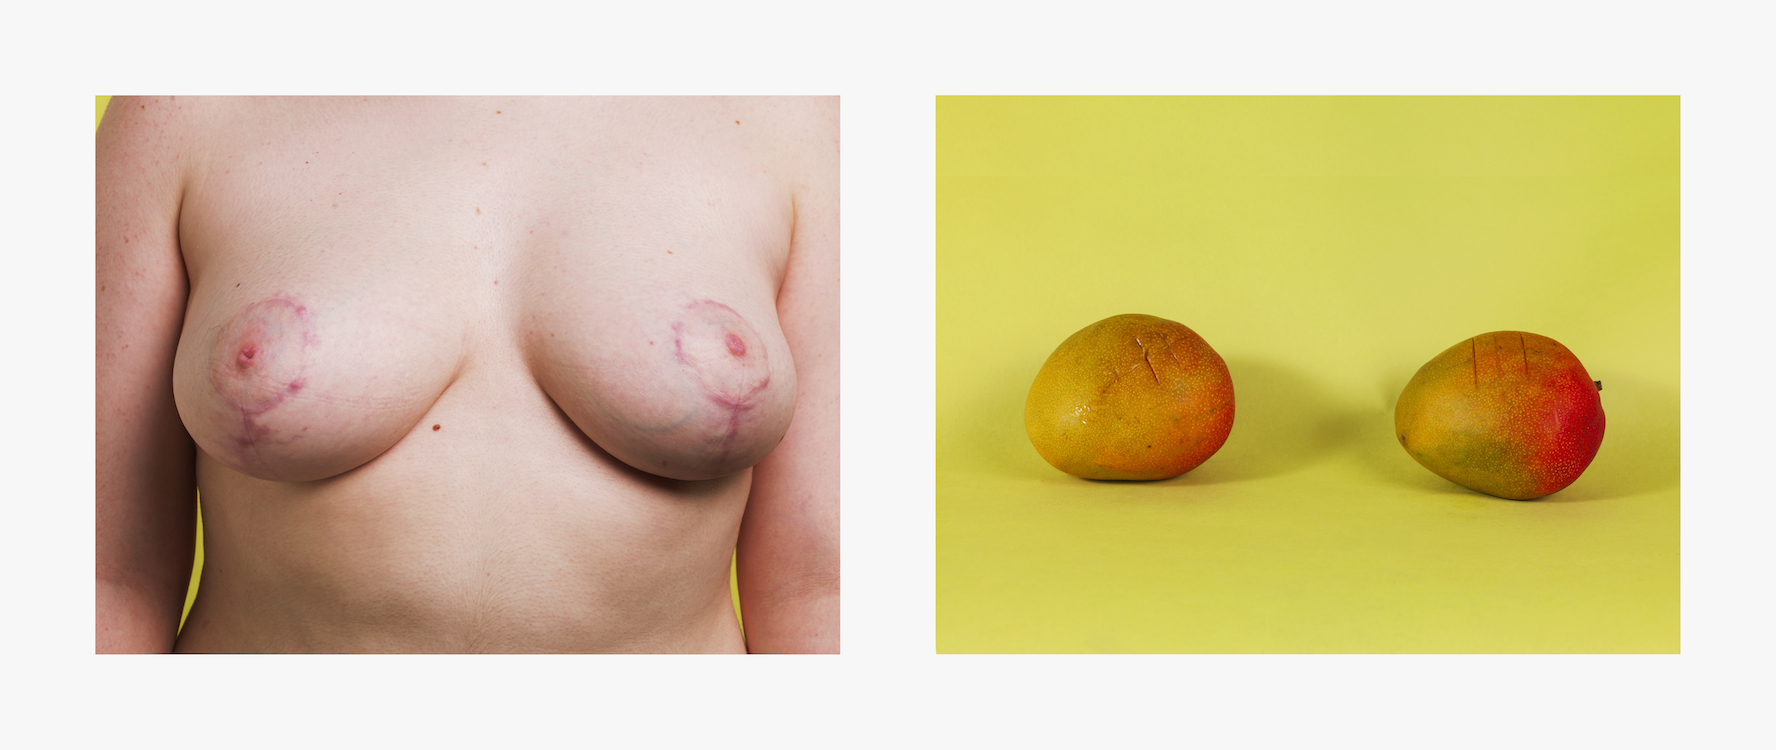 04-boobs-personal-work-charlotte-abramow-photography-paris-brussels